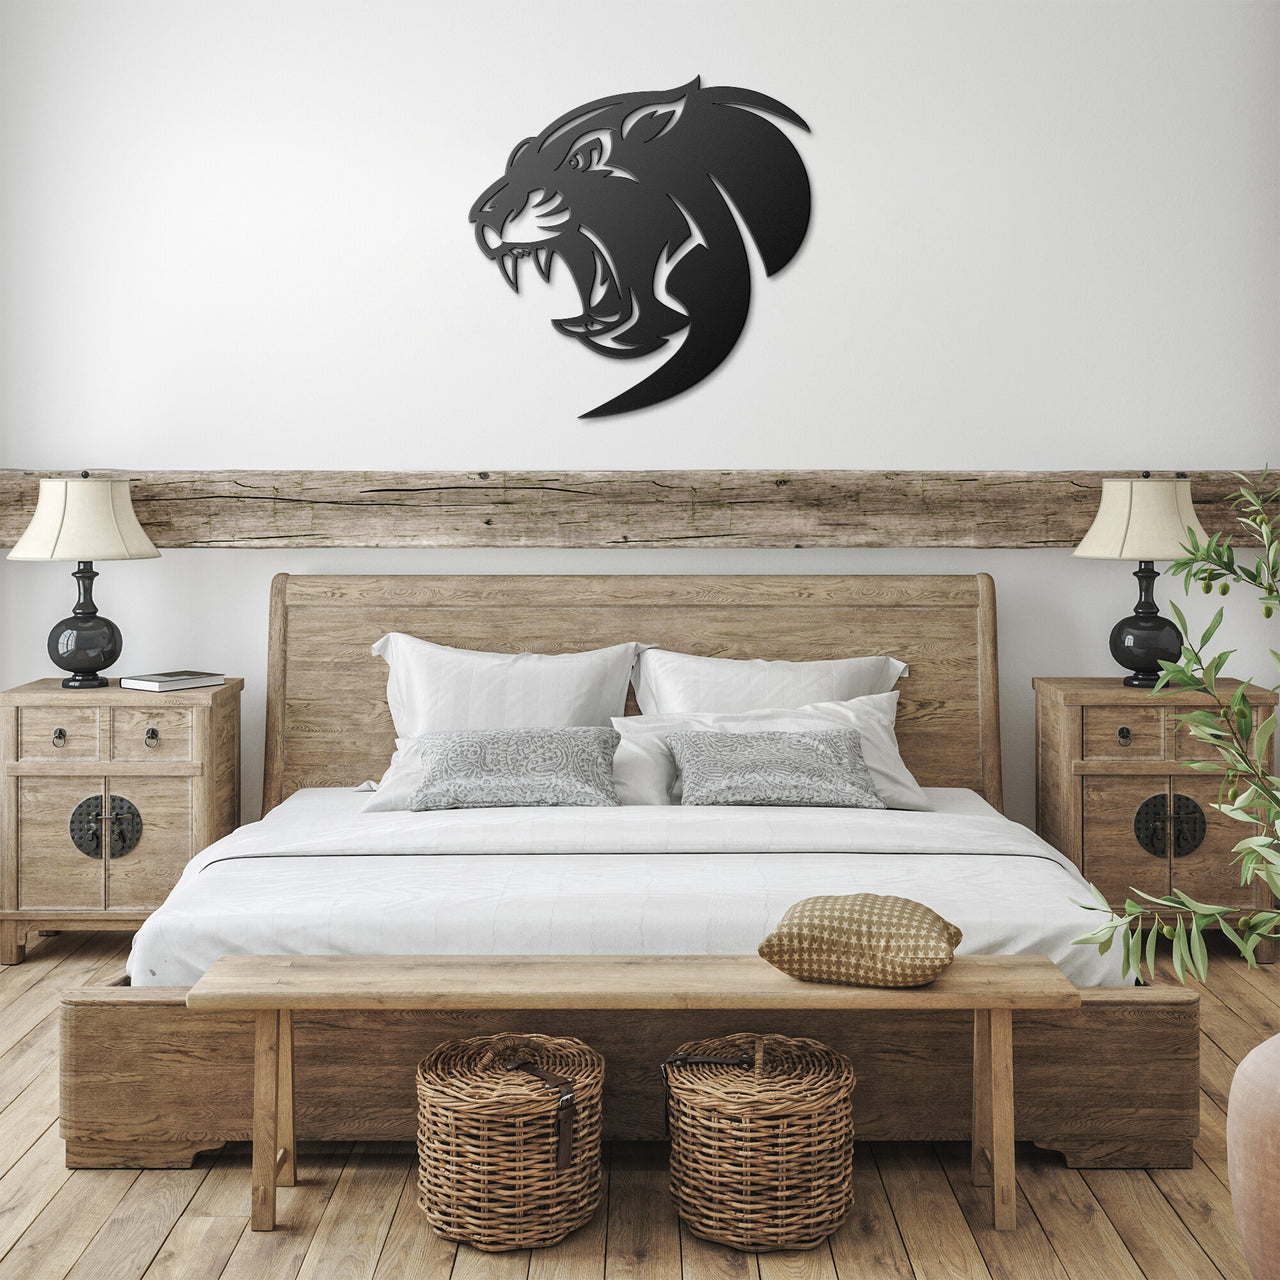 Panther 38-Black-Steel Wall Art